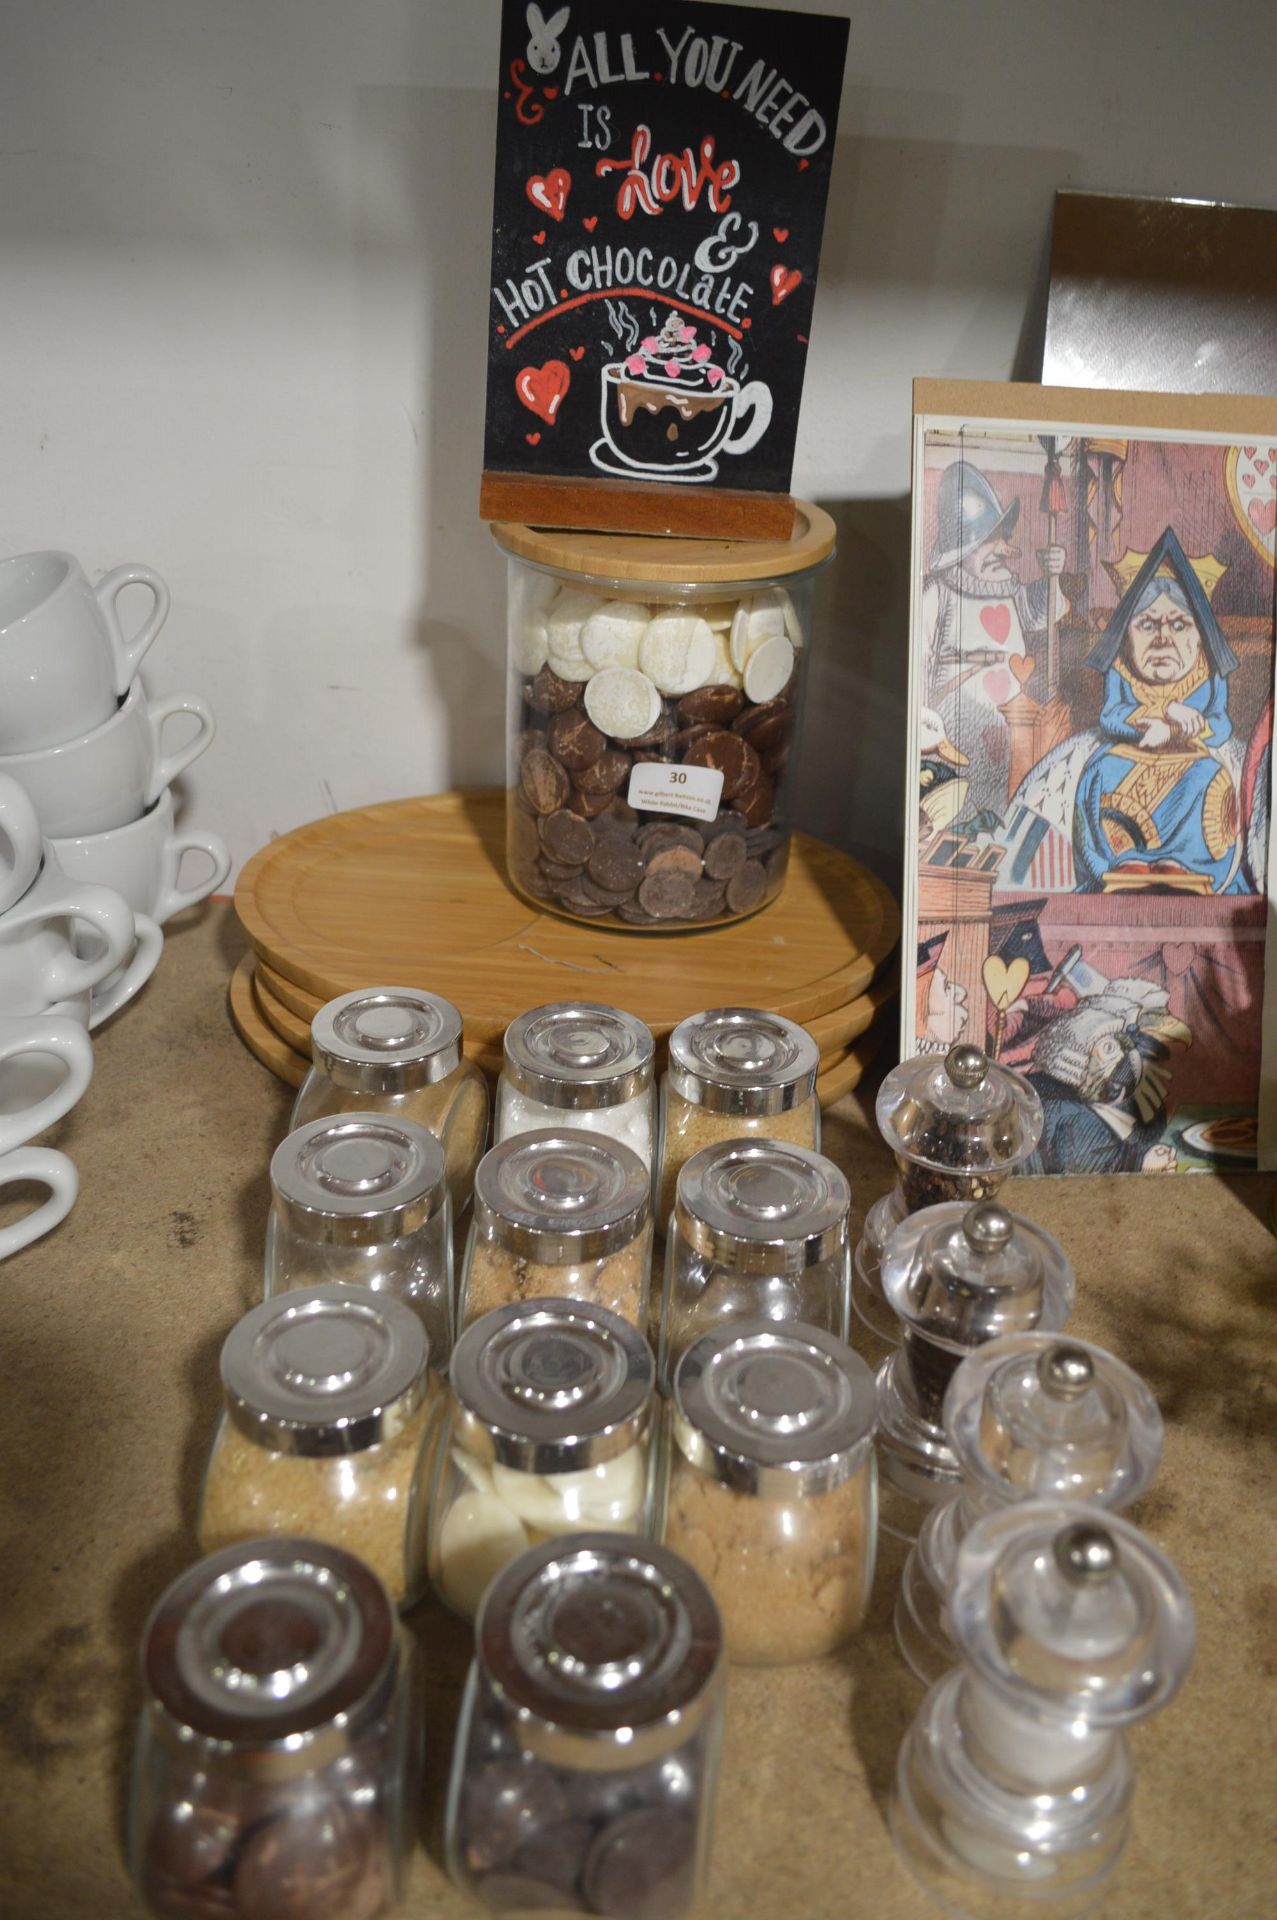 *Quantity of Sugar and Chocolate Buttons in Glass Jars, plus Salt and Pepper Grinders, Wooden